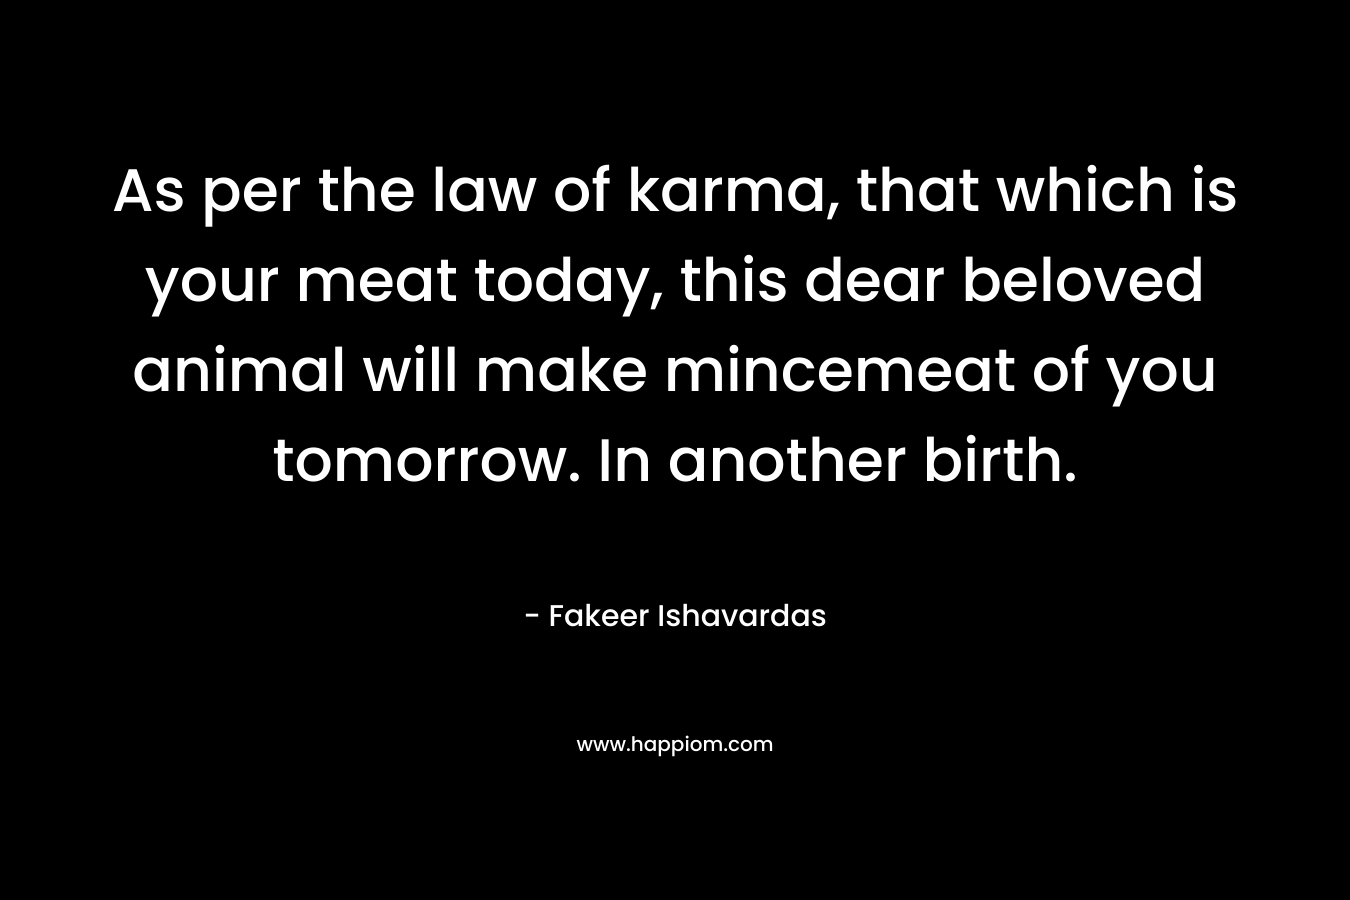 As per the law of karma, that which is your meat today, this dear beloved animal will make mincemeat of you tomorrow. In another birth. – Fakeer Ishavardas